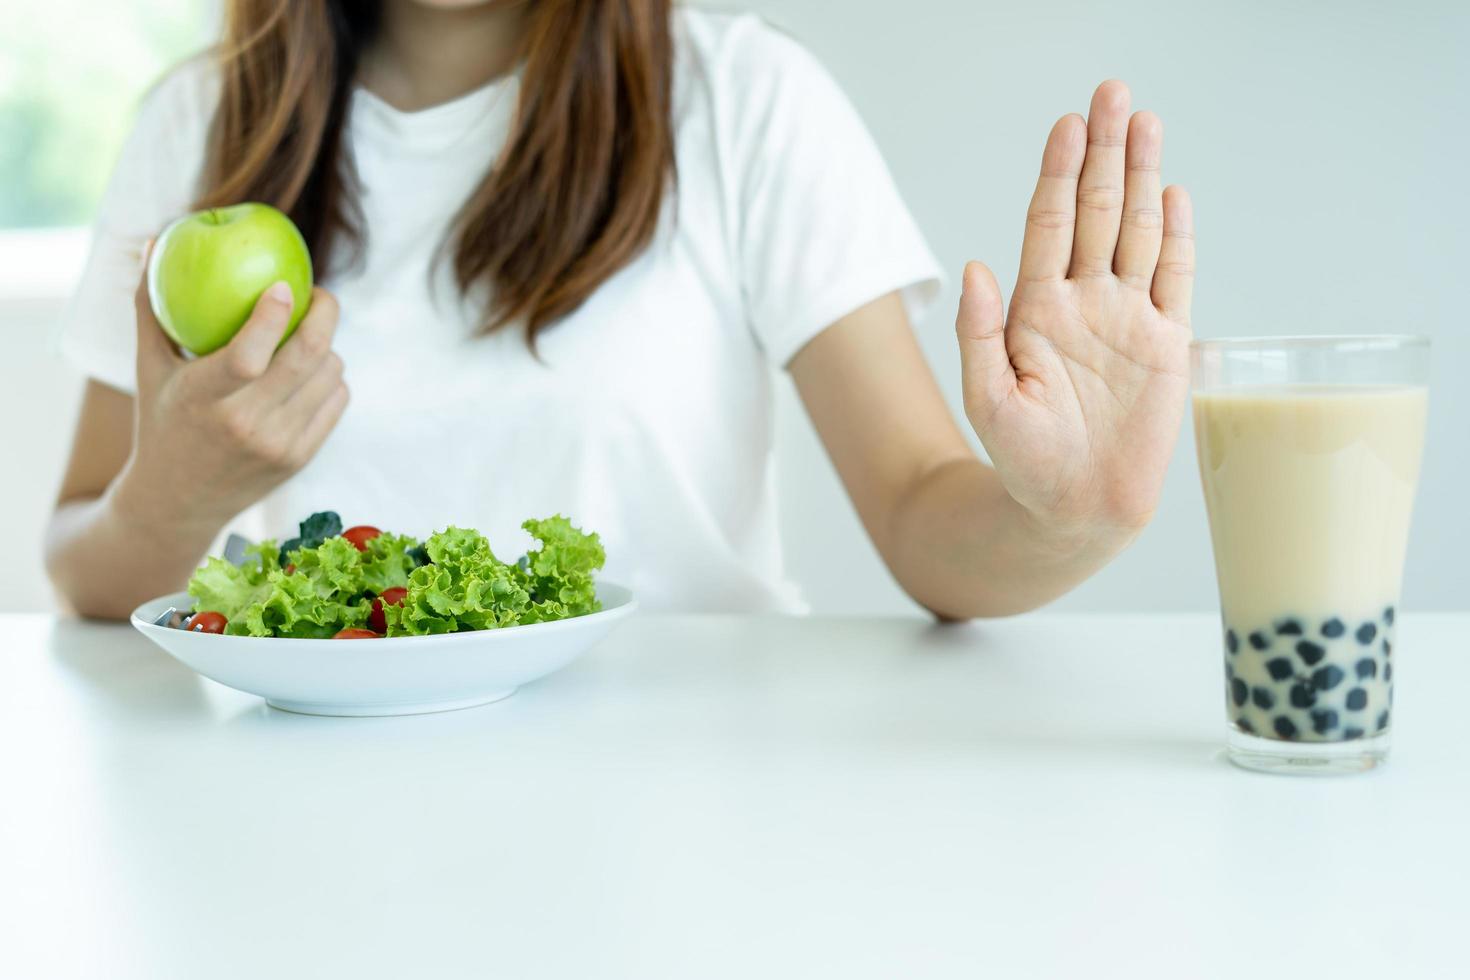 Women reject junk food or unhealthy foods such as doughnuts and choose healthy foods such as green apples and salads. Concept of fasting and good health. photo